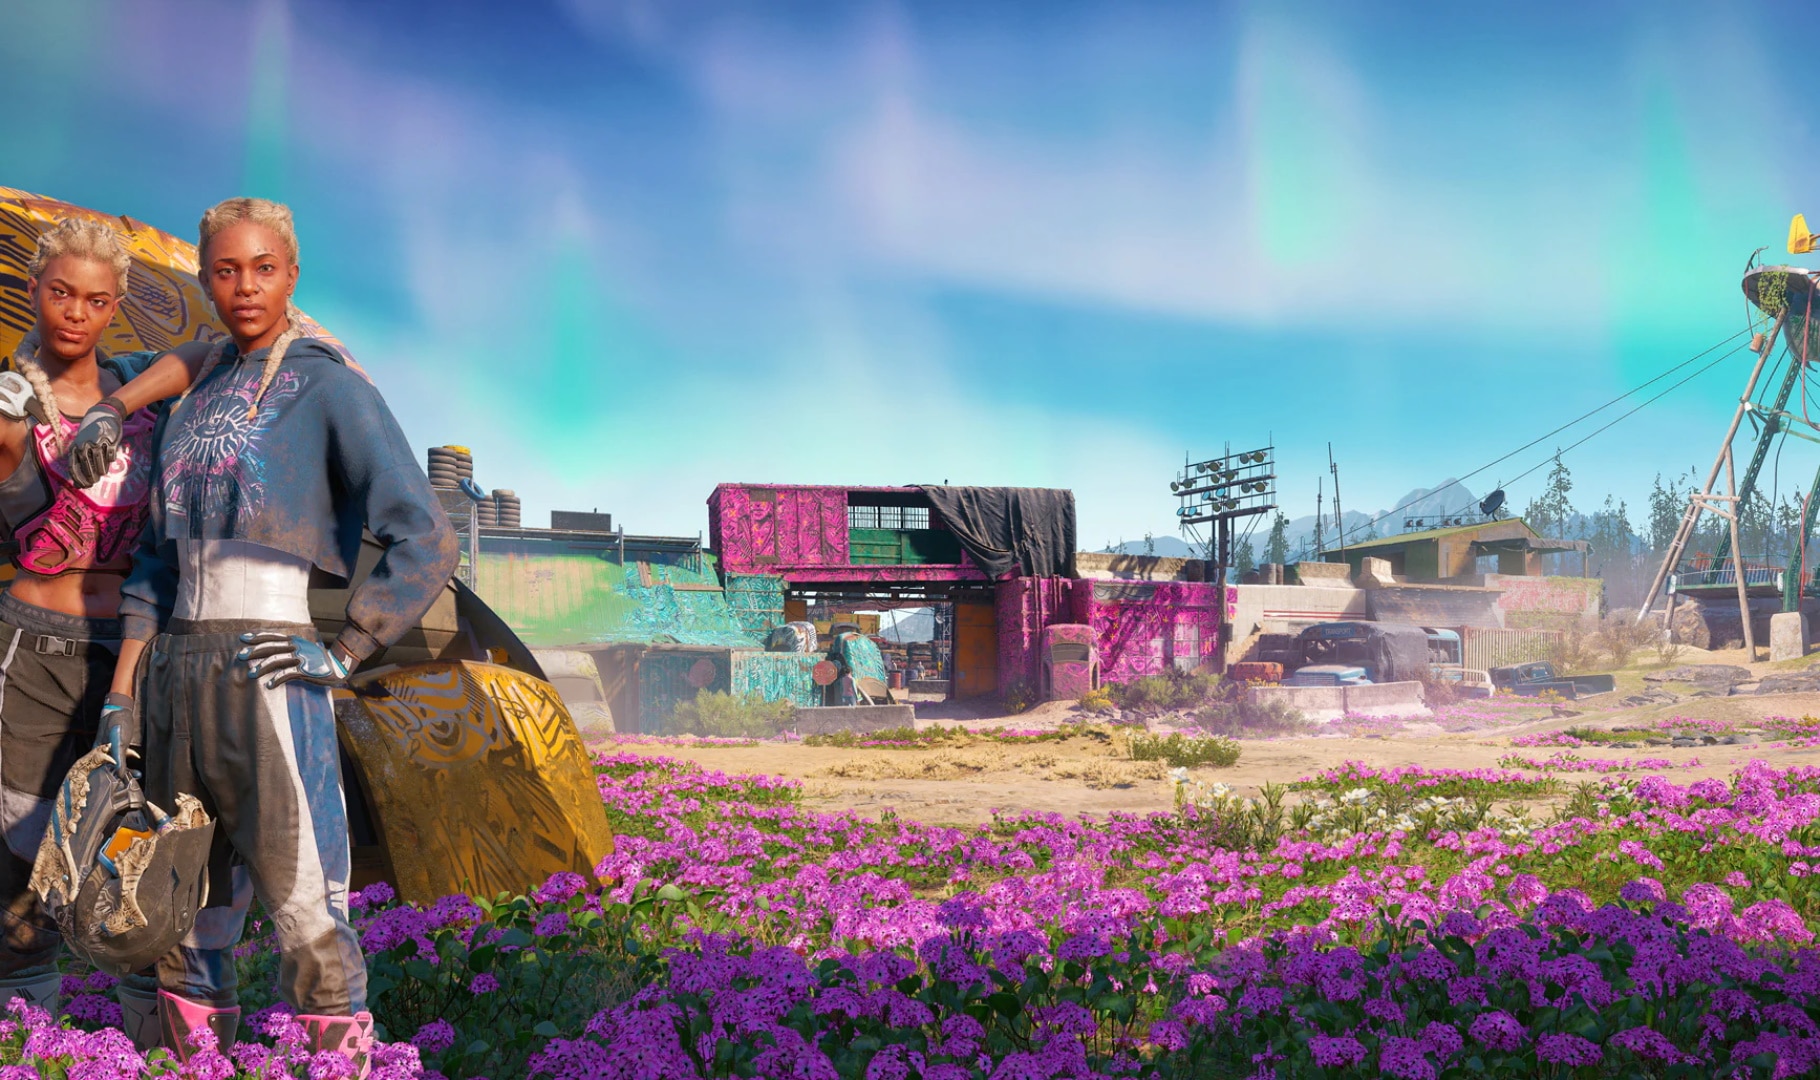 Far Cry New Dawn System Requirements